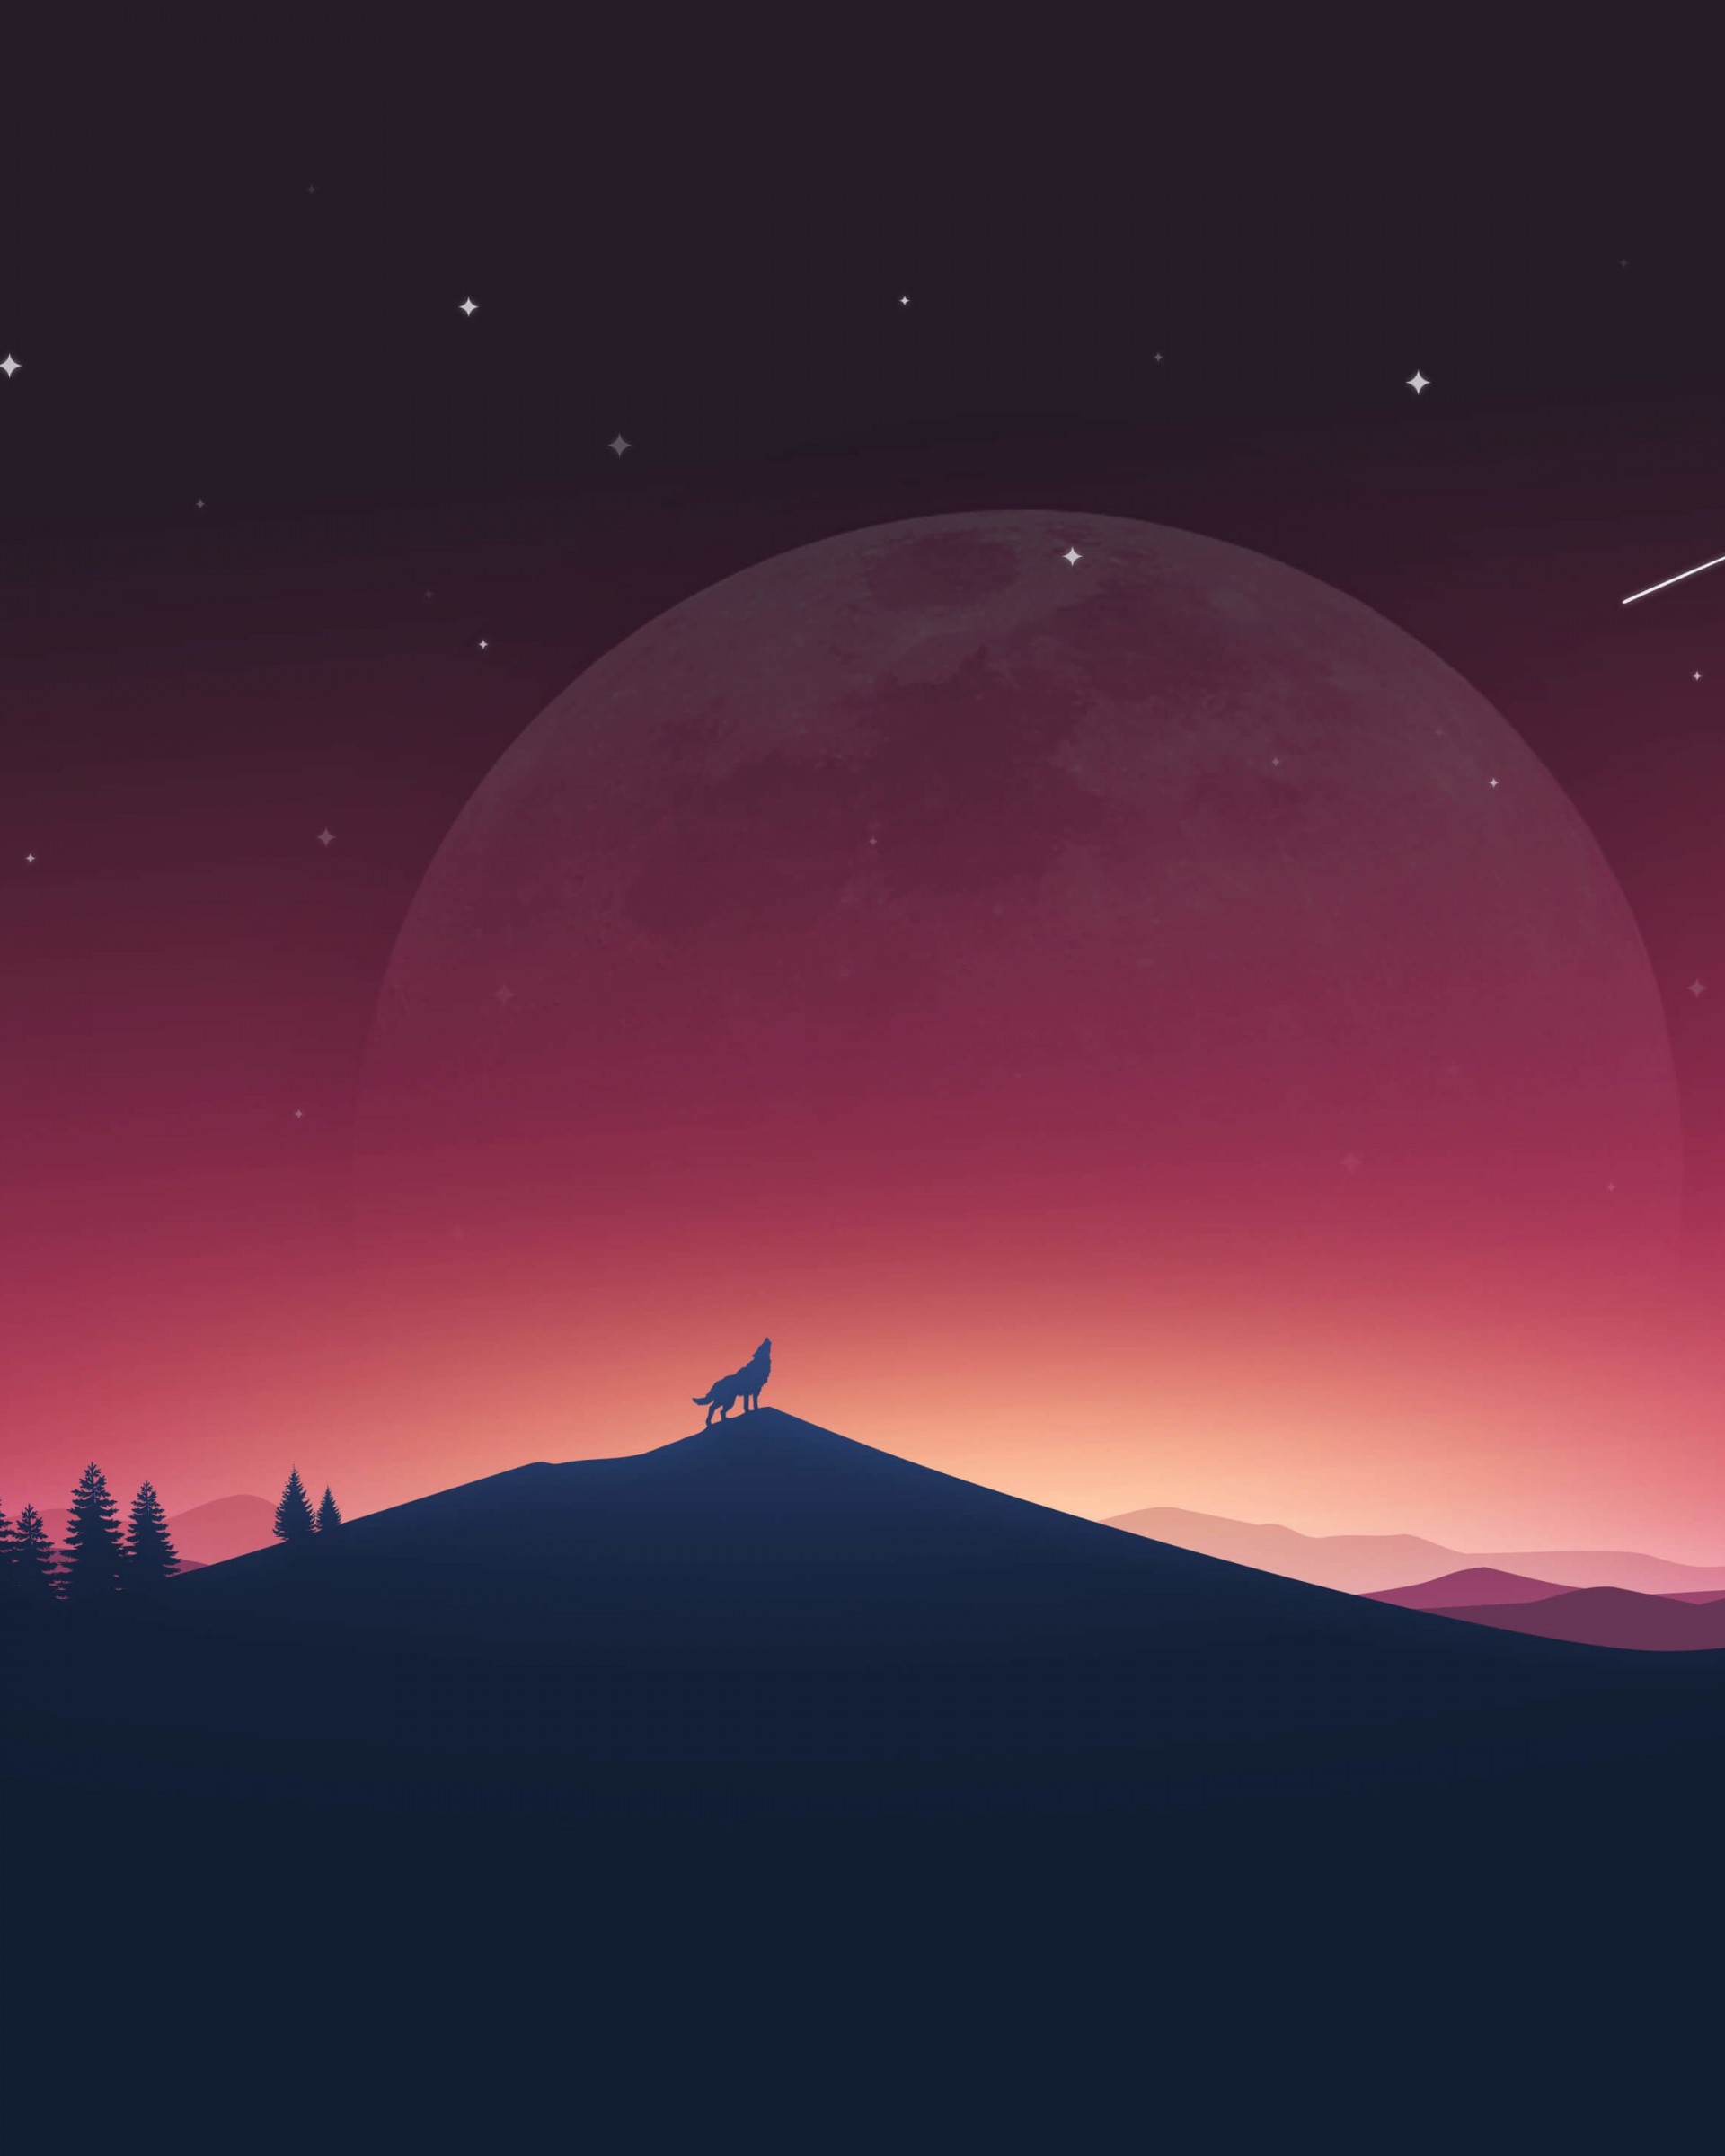 Wolf Howling At The Moon Wallpaper for Google Nexus 7